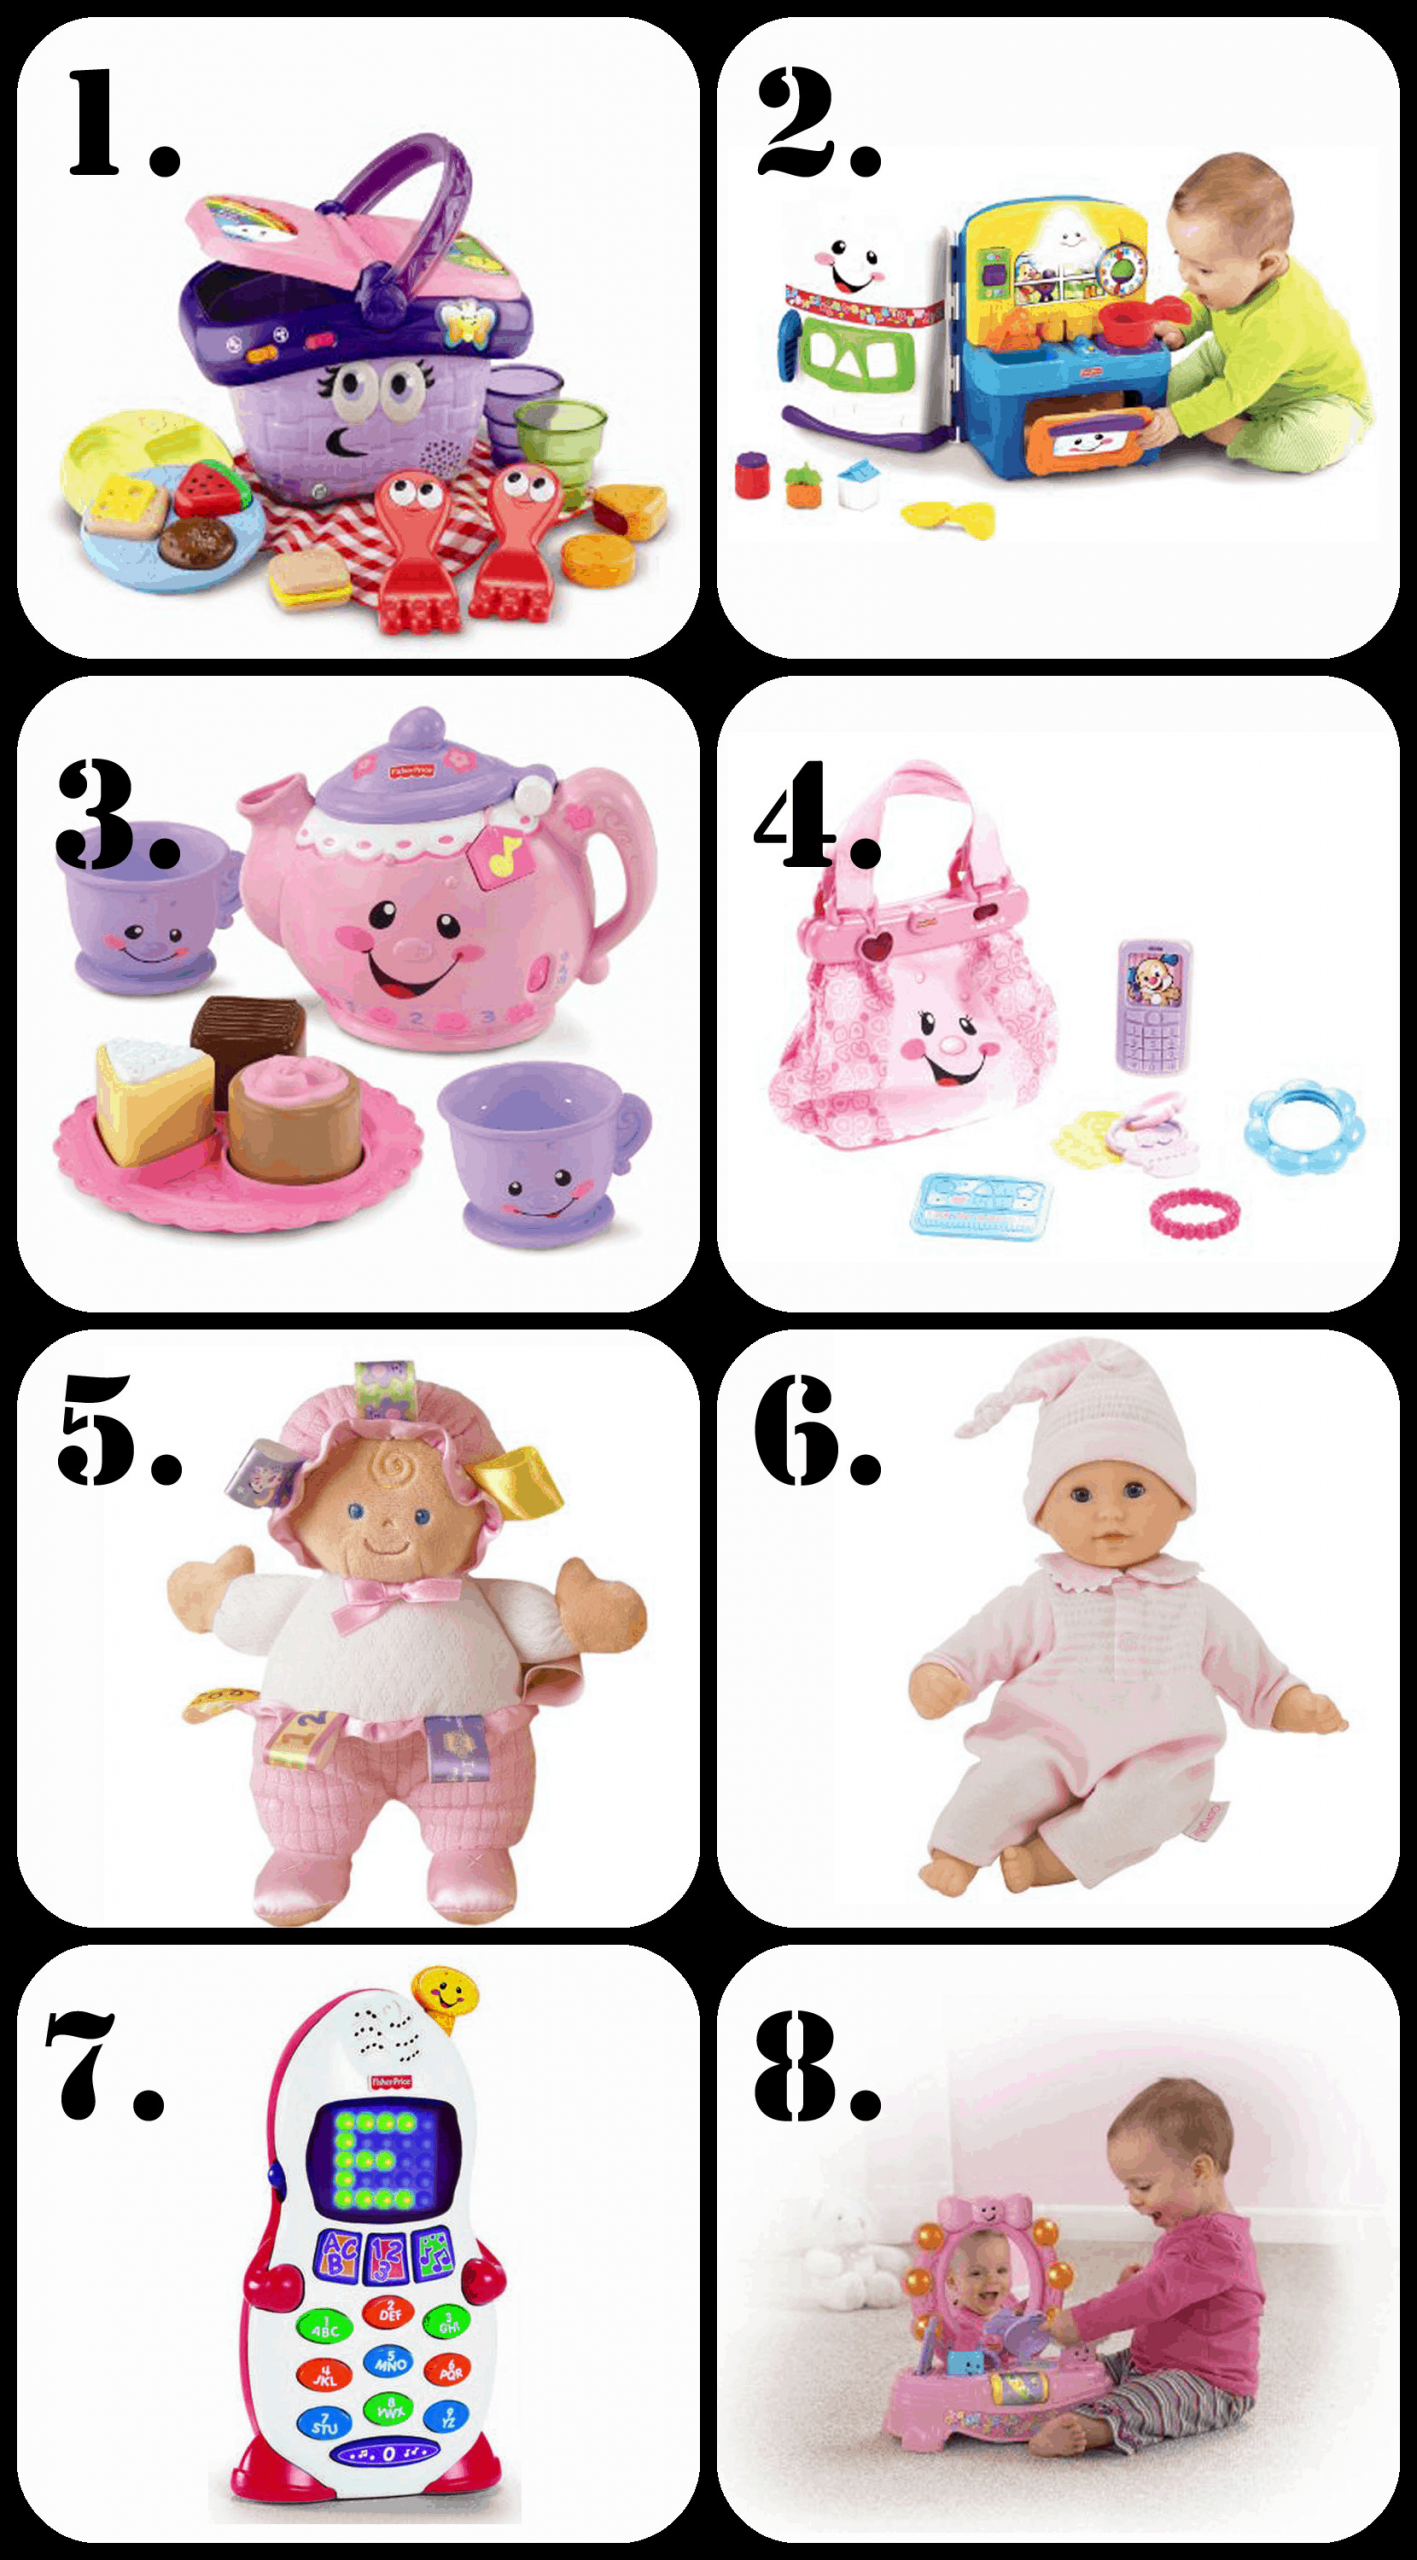 Best 1 Year Old Birthday Gift
 The Ultimate Gift List for a 1 Year Old Girl • The